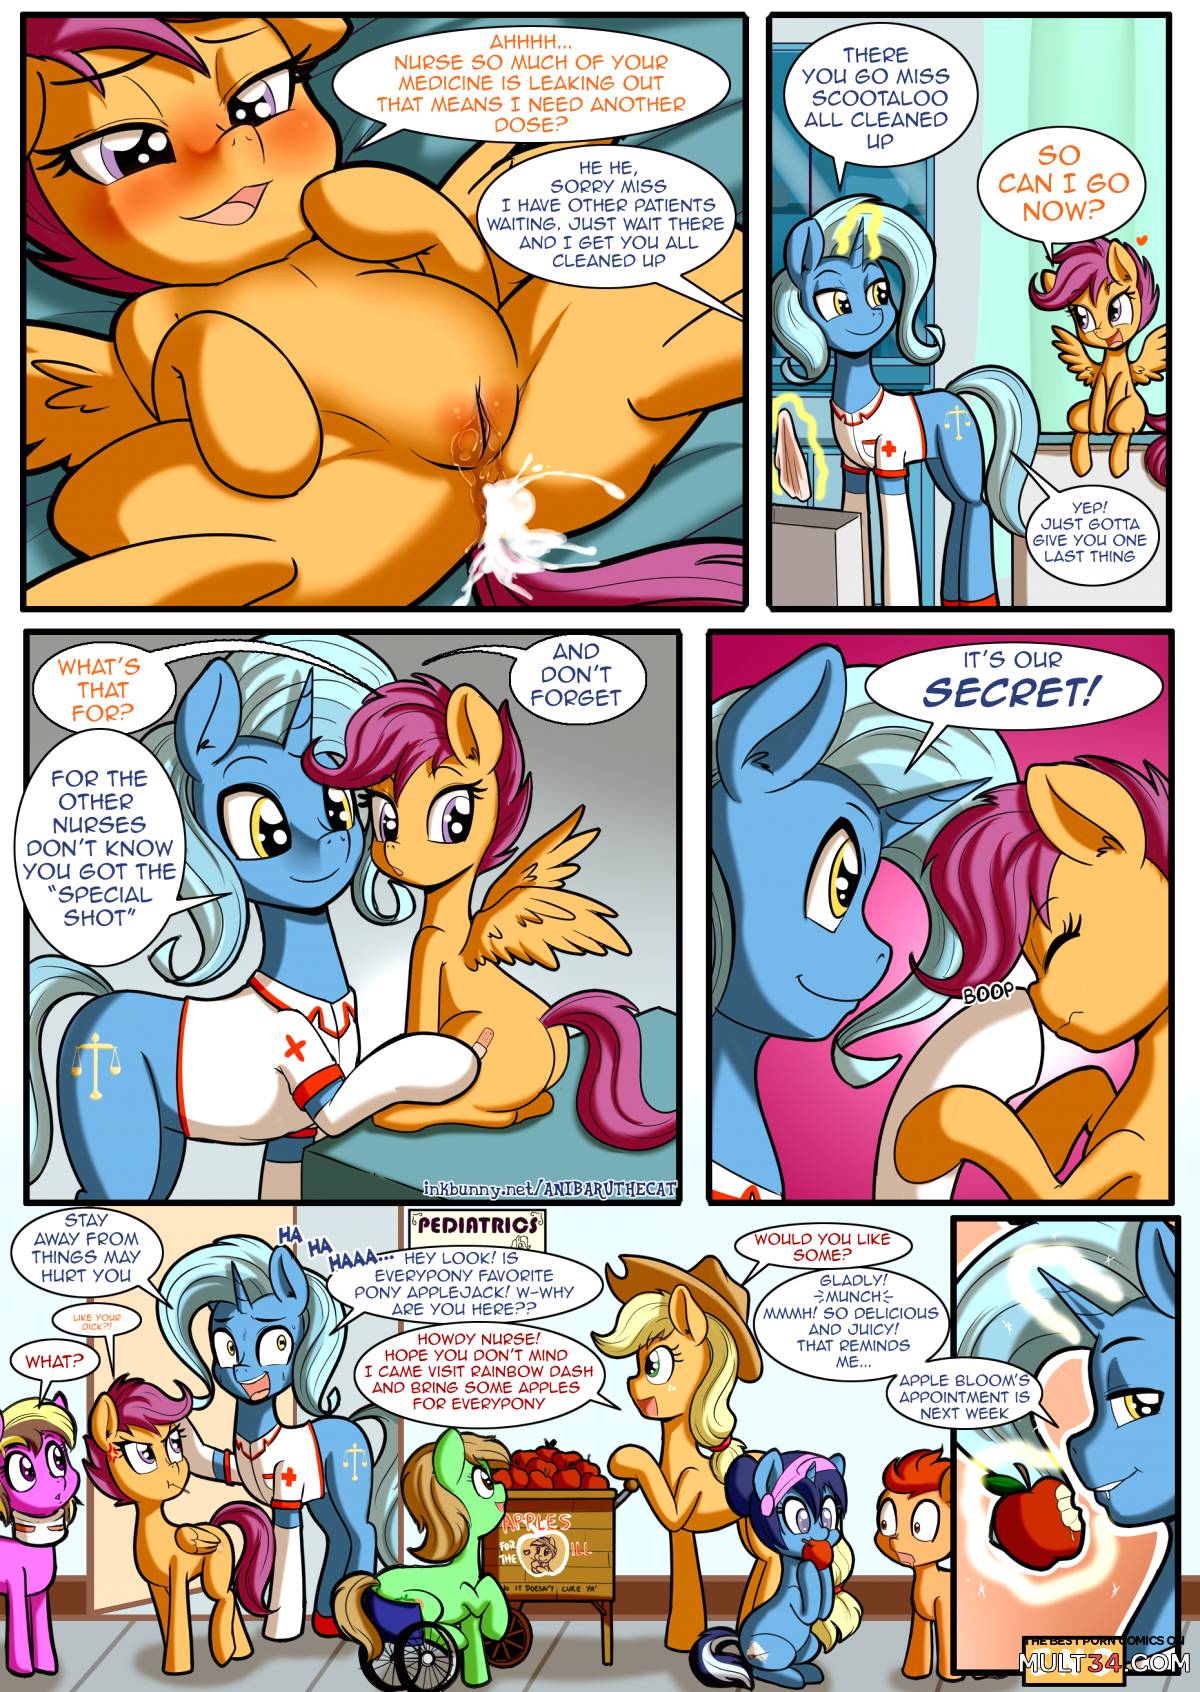 Cutie mark check up 2 page 11